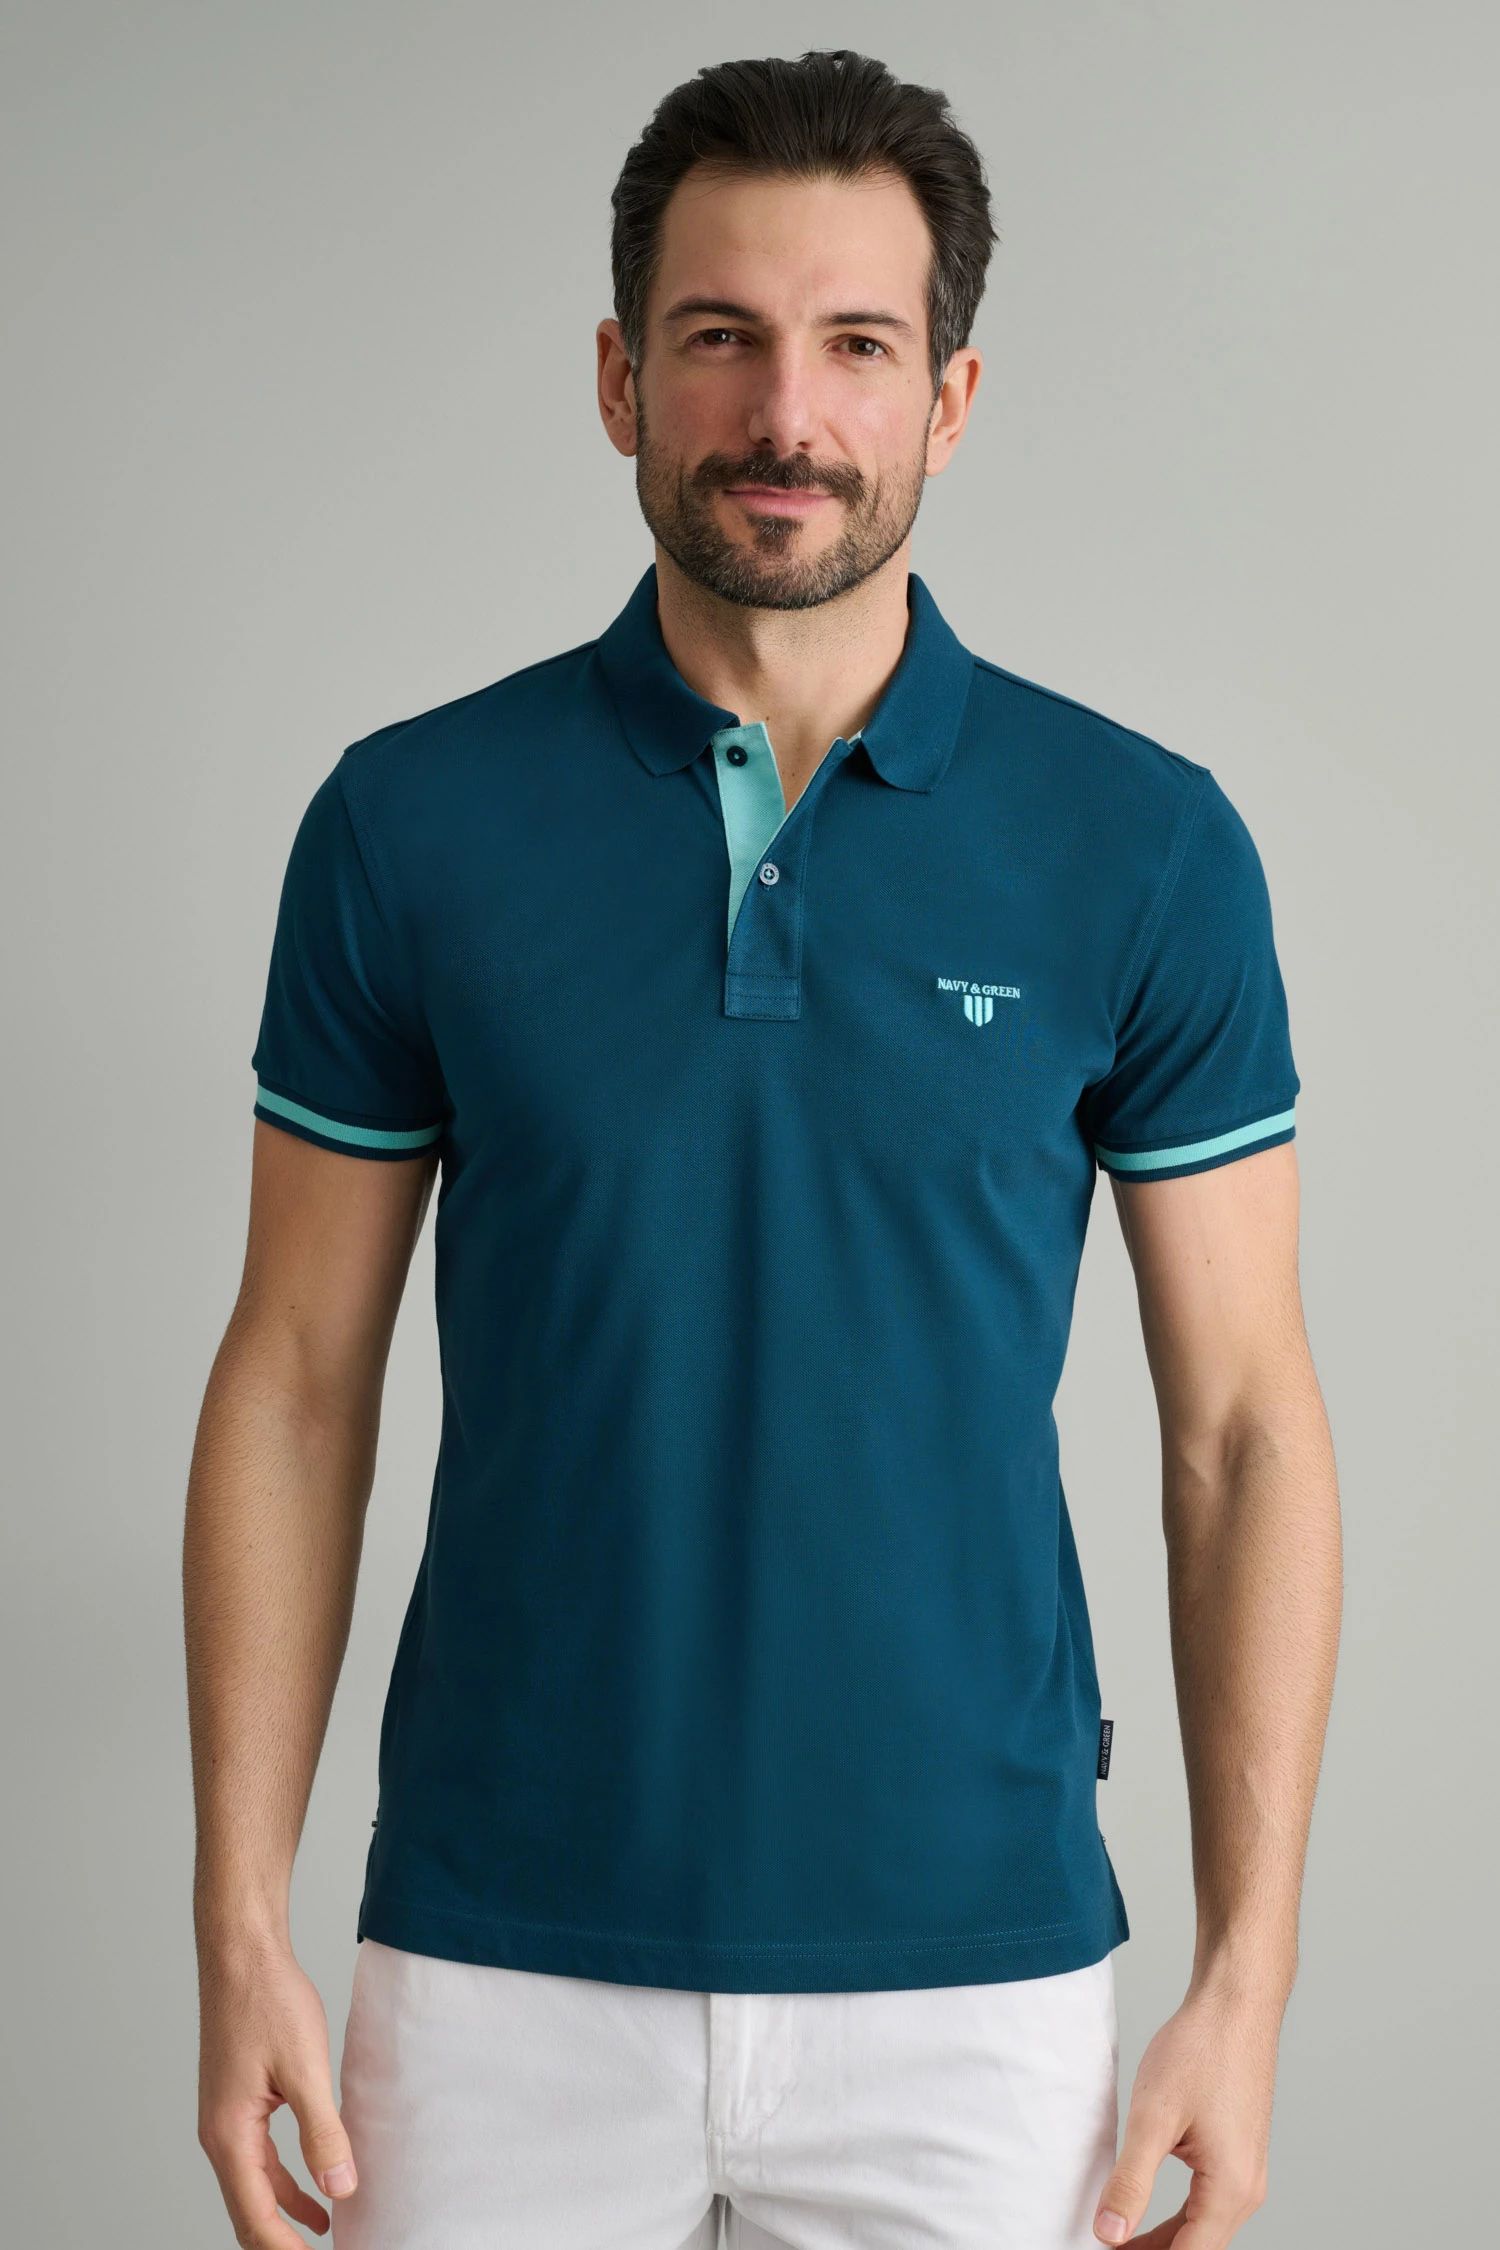 NAVY&GREEN POLO ΜΠΛΟΥΖΑΚΙ-YOUNG LINE 24GE.879/YL.2-MOROCCAN BLUE Petrol 3820PNAVY3410098_XR21036